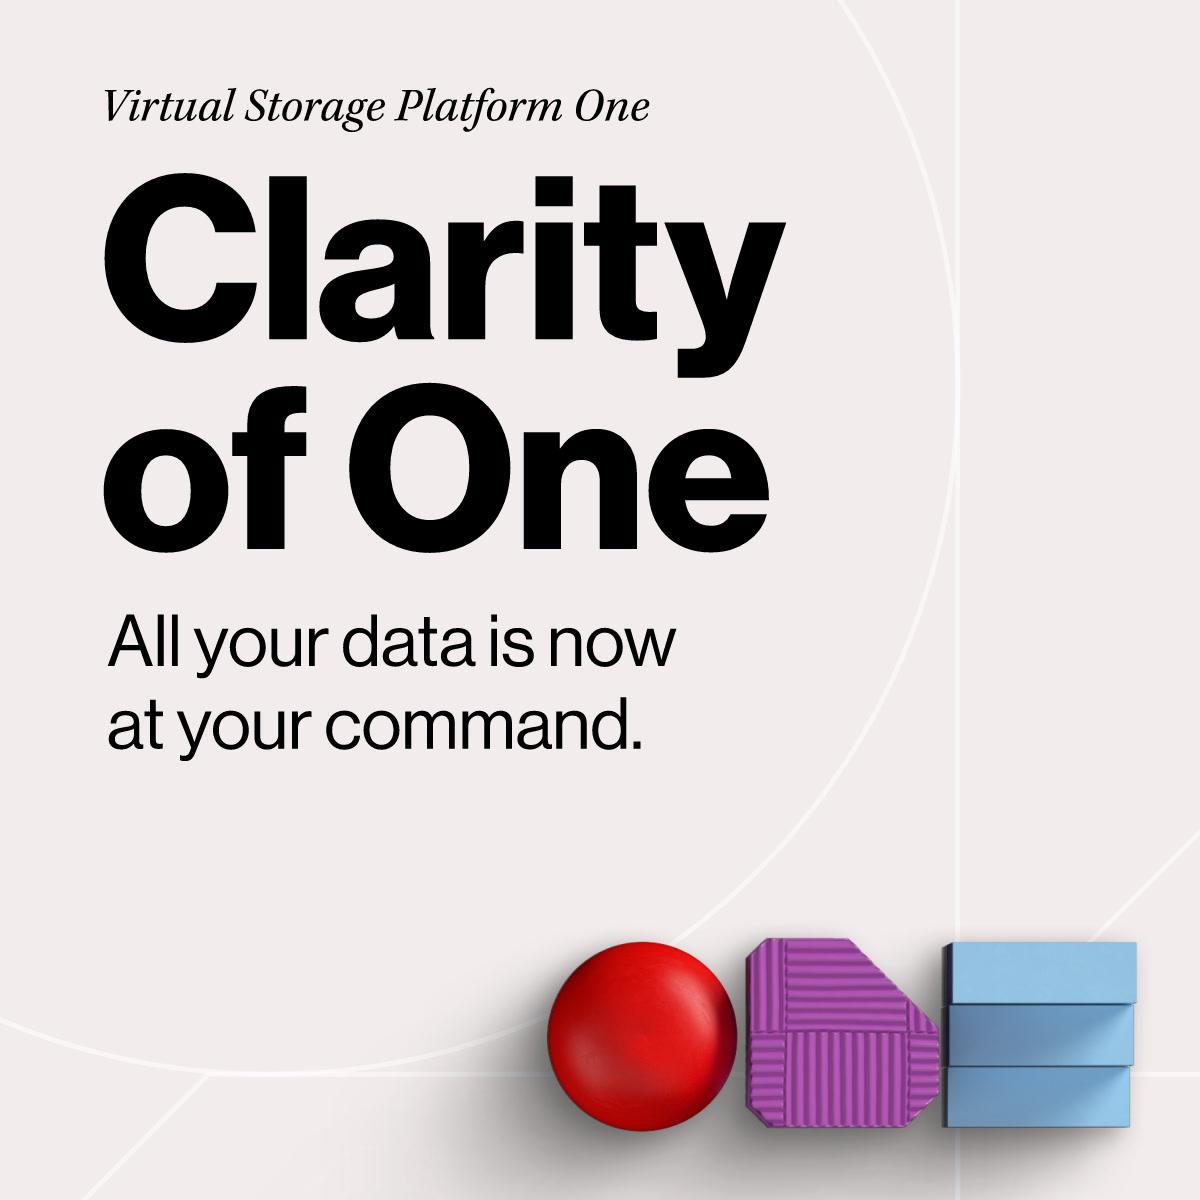 #HybridCloud clarity is in reach. Discover how Hitachi Virtual Storage Platform One clears data silos to unlock holistic business insights and drive innovation with one data platform: ow.ly/z4at30sBWjt #VSPOne